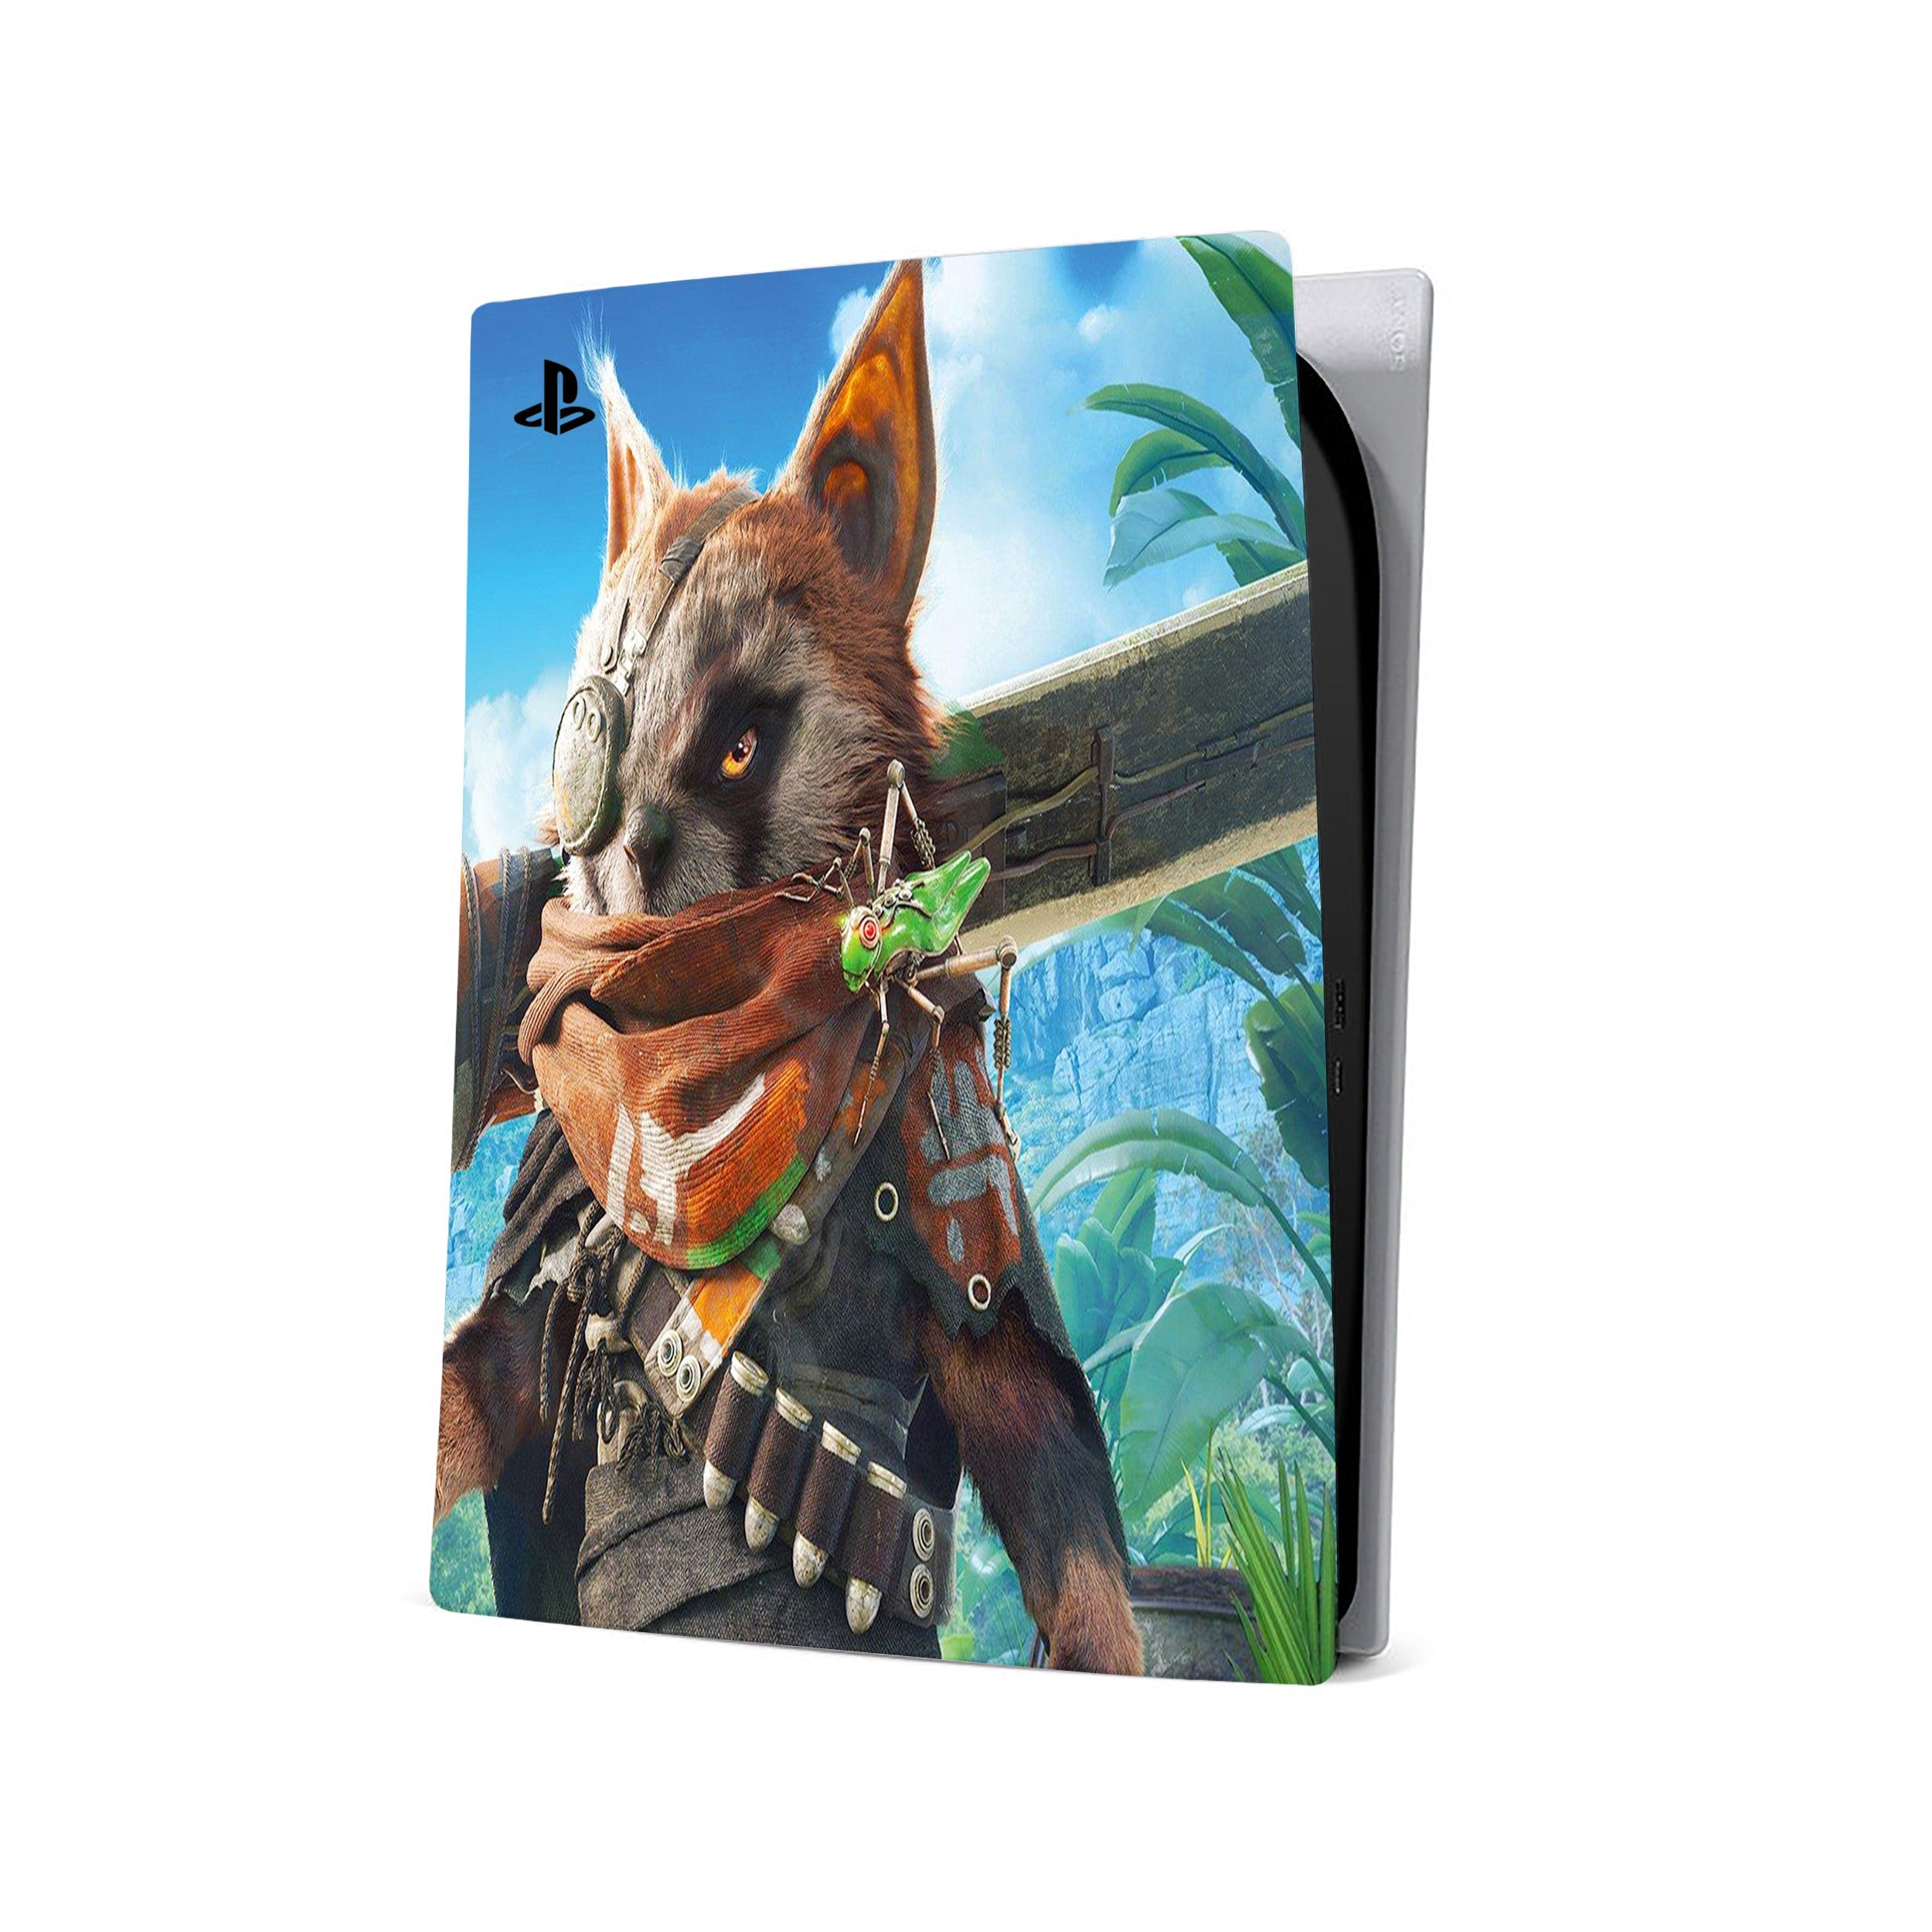 A video game skin featuring a Biomutant design for the PS5.